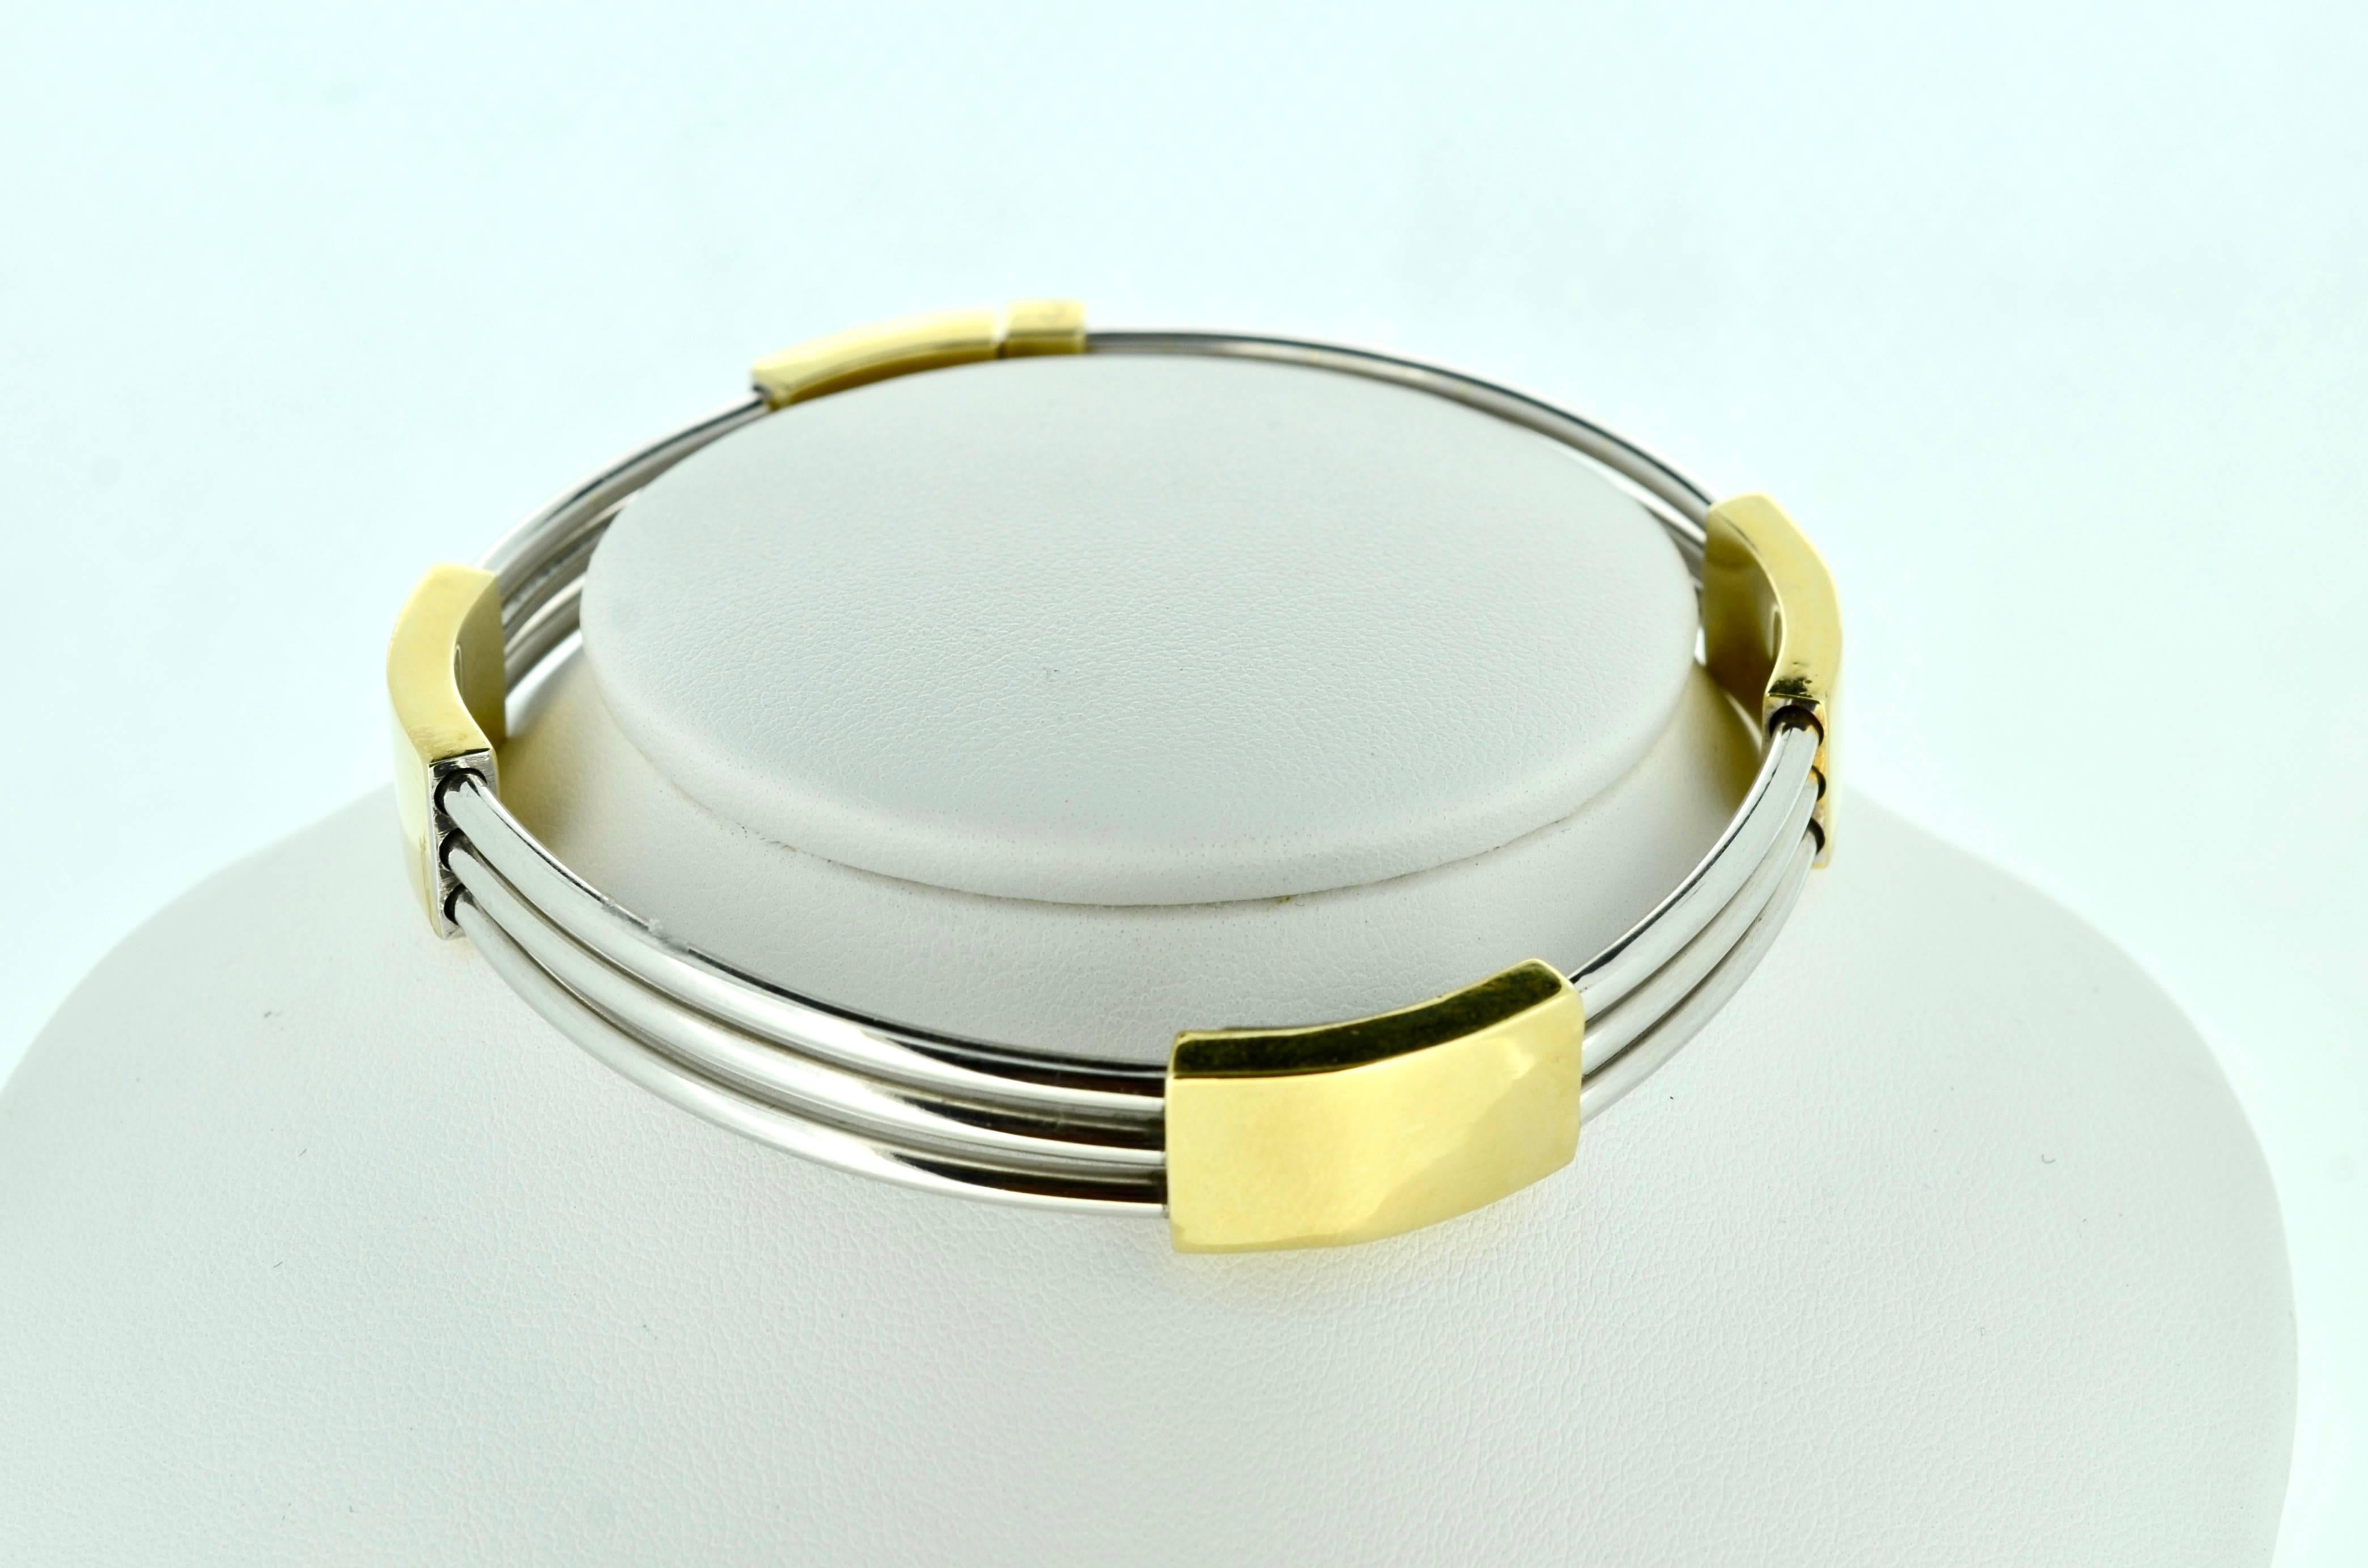 Contemporary bracelet in 14kt white gold and yellow gold. Open triple tubular bars intersecting with contrasting 14kt yellow gold rectangular bars. Inside diameter is 8 inches. 11.5mm uniform width with plunger clasp.